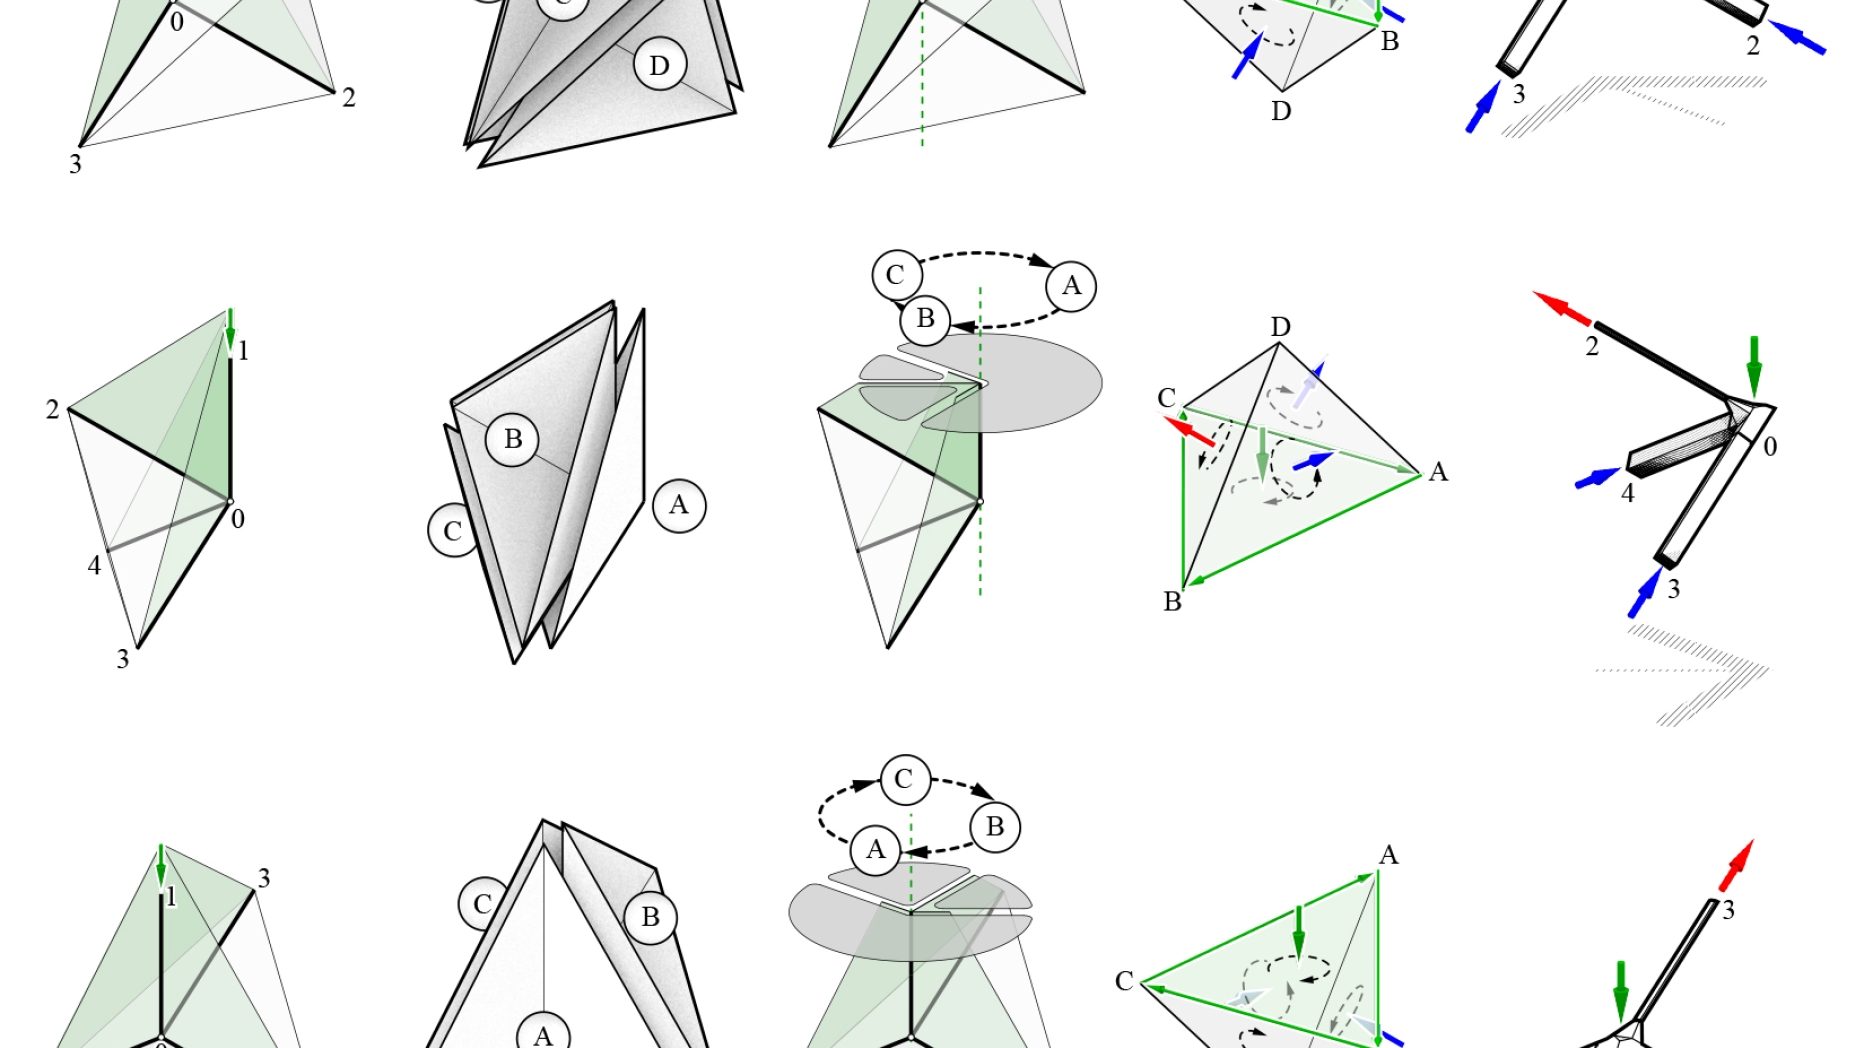 Rows of models of tetrahedron like structures